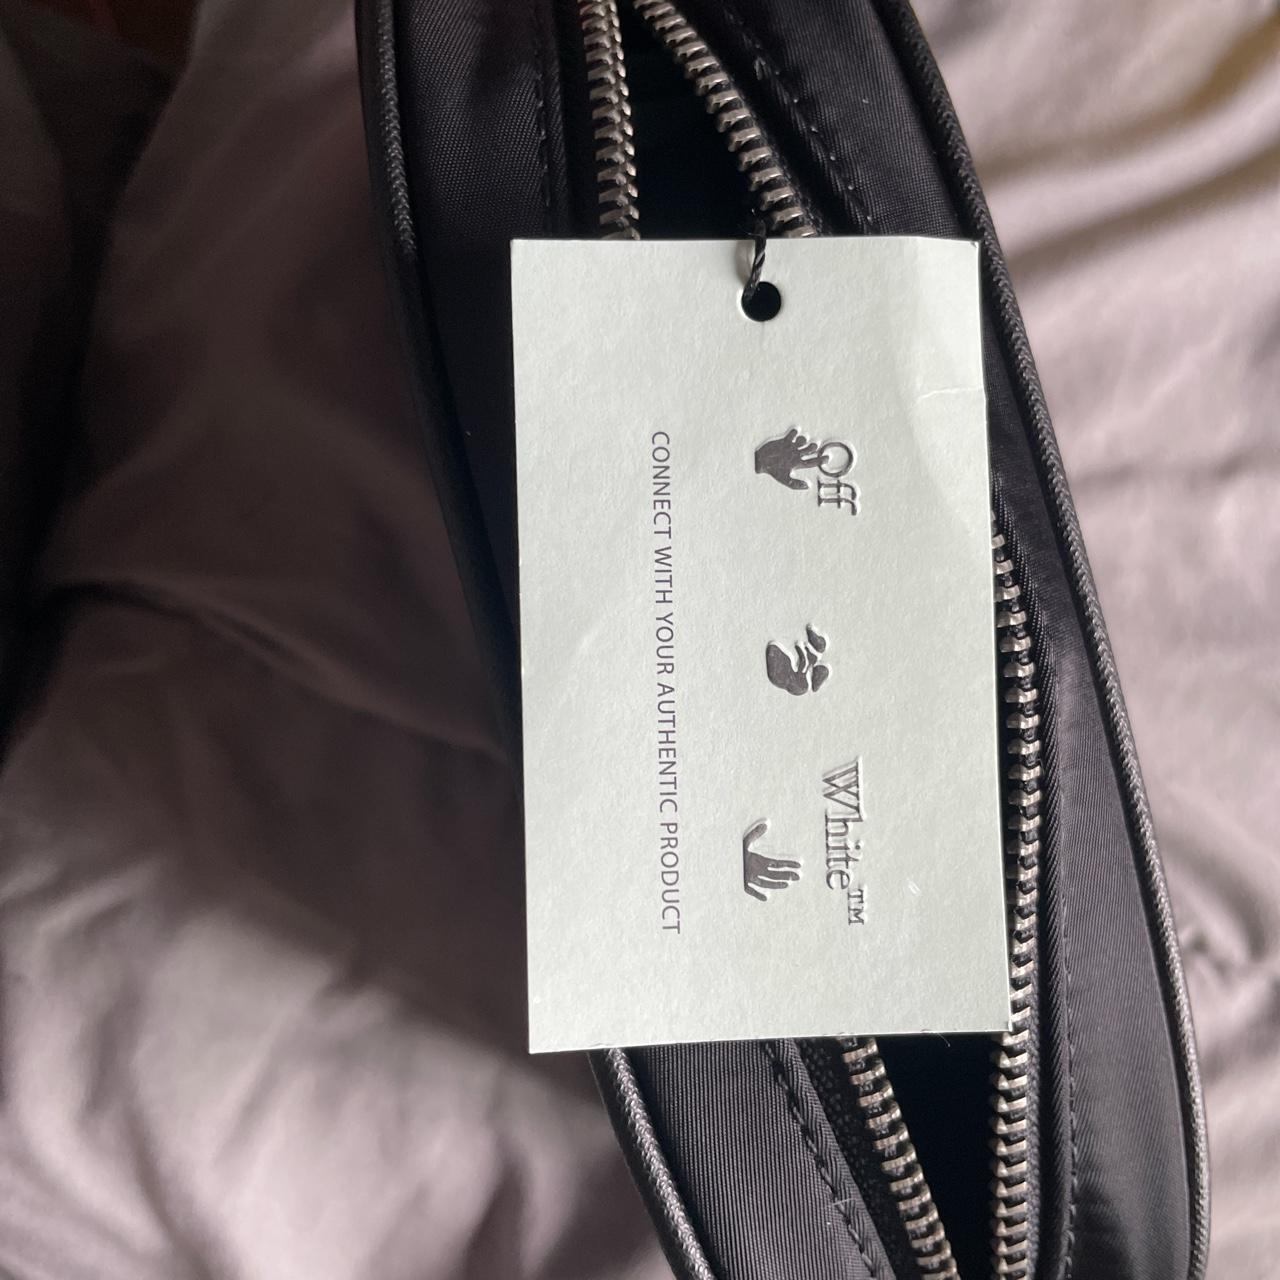 off-white bag, only used twice. No tissue bag included. - Depop